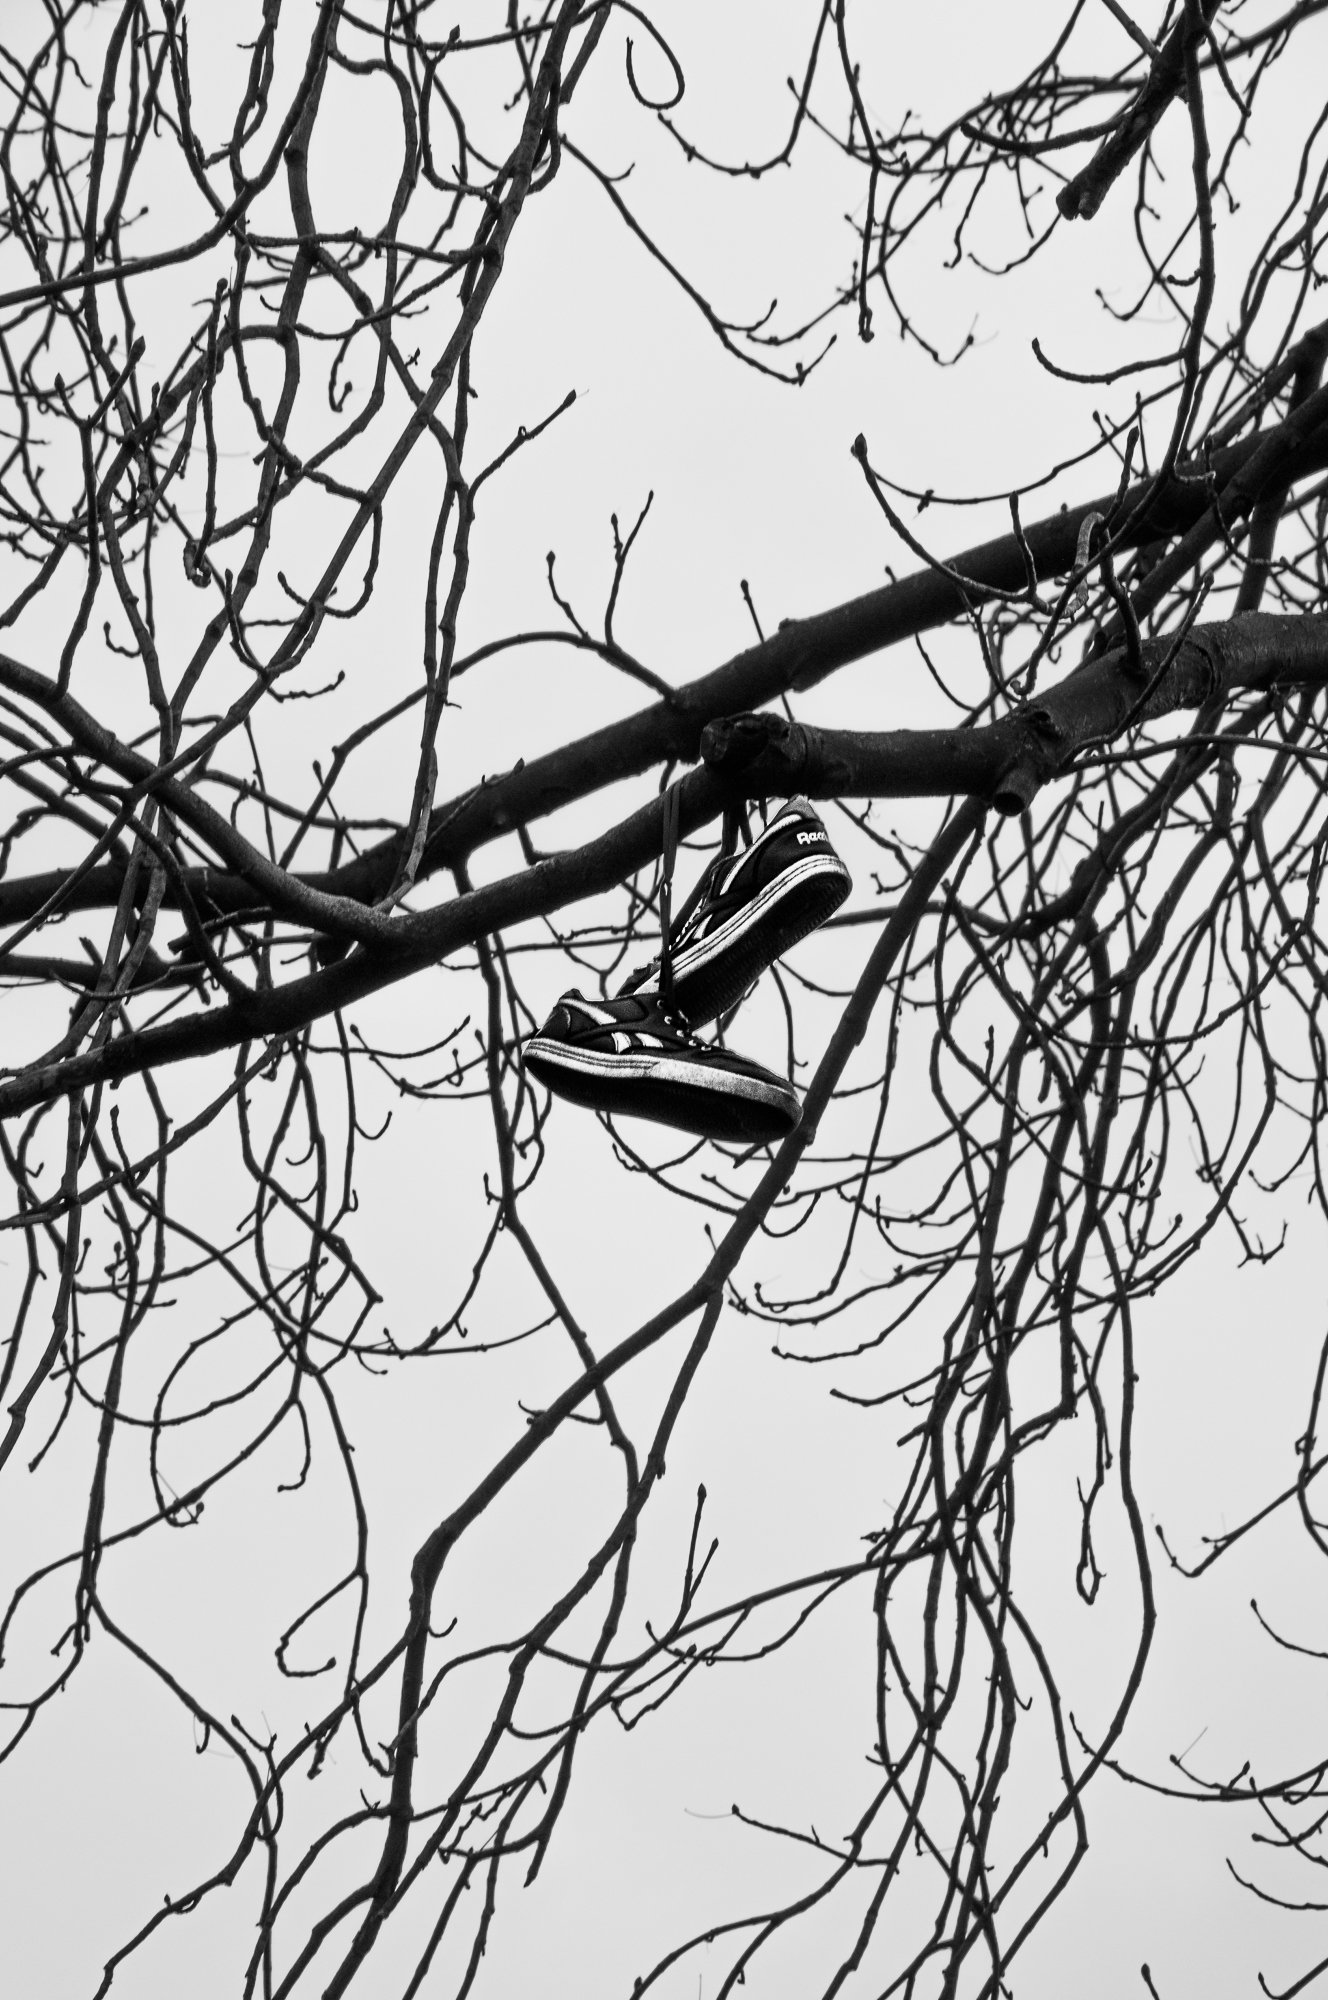 Adam Mazek Photography Warsaw (Warszawa) 2018. Post: "Outfit for street photography." Minimalism. Hanging sneakers on the tree.